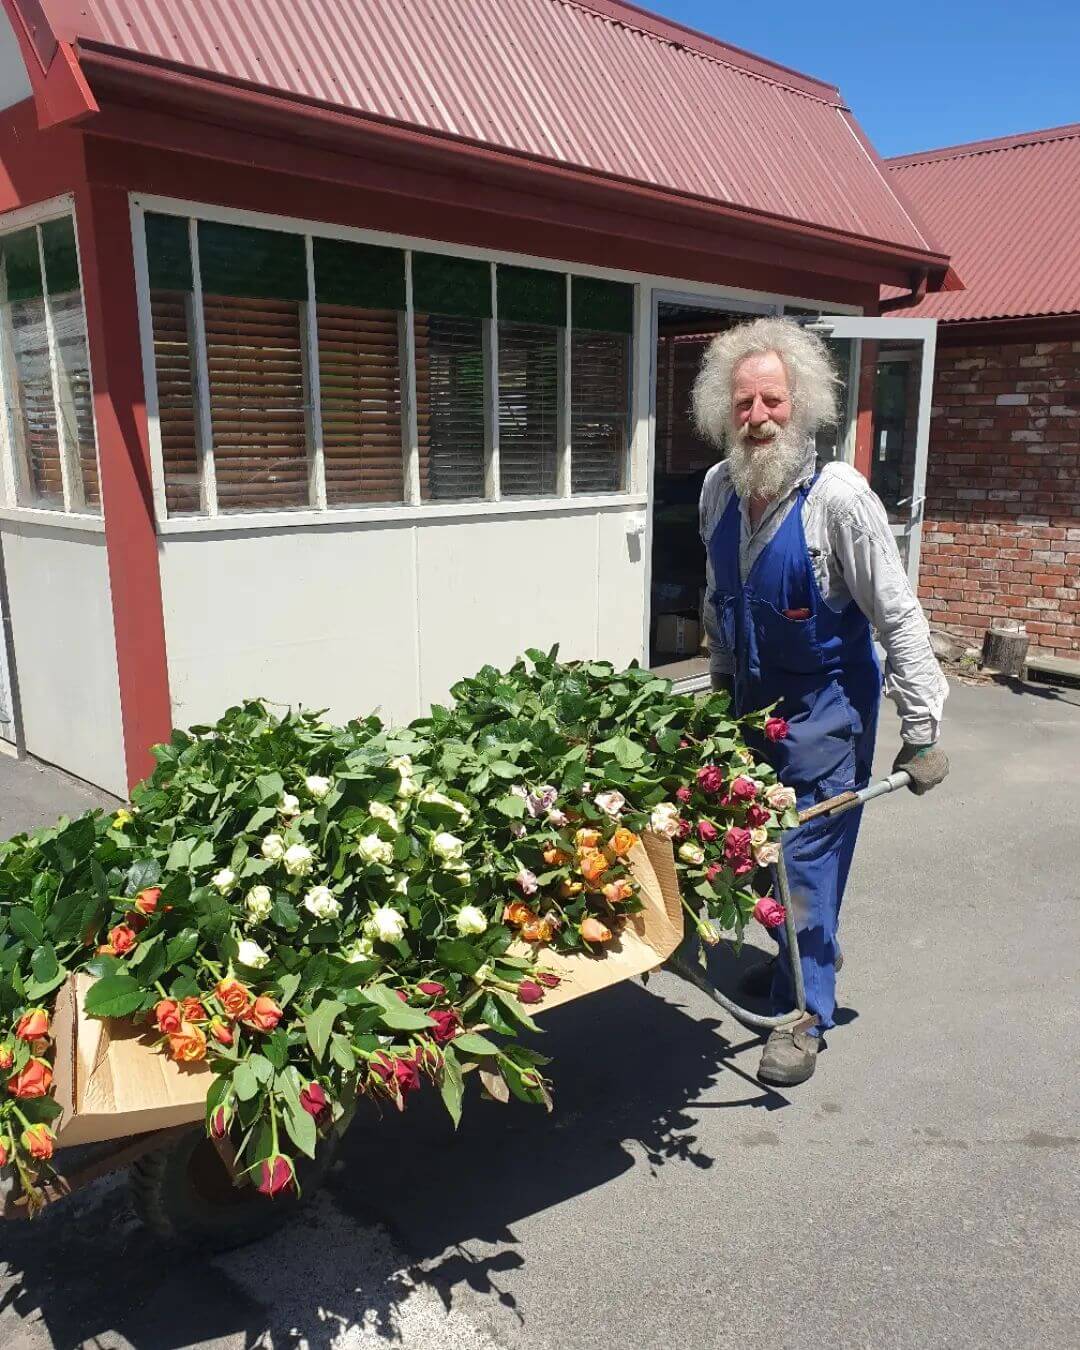 Our farmer delivering freshly cut flowers to our florist